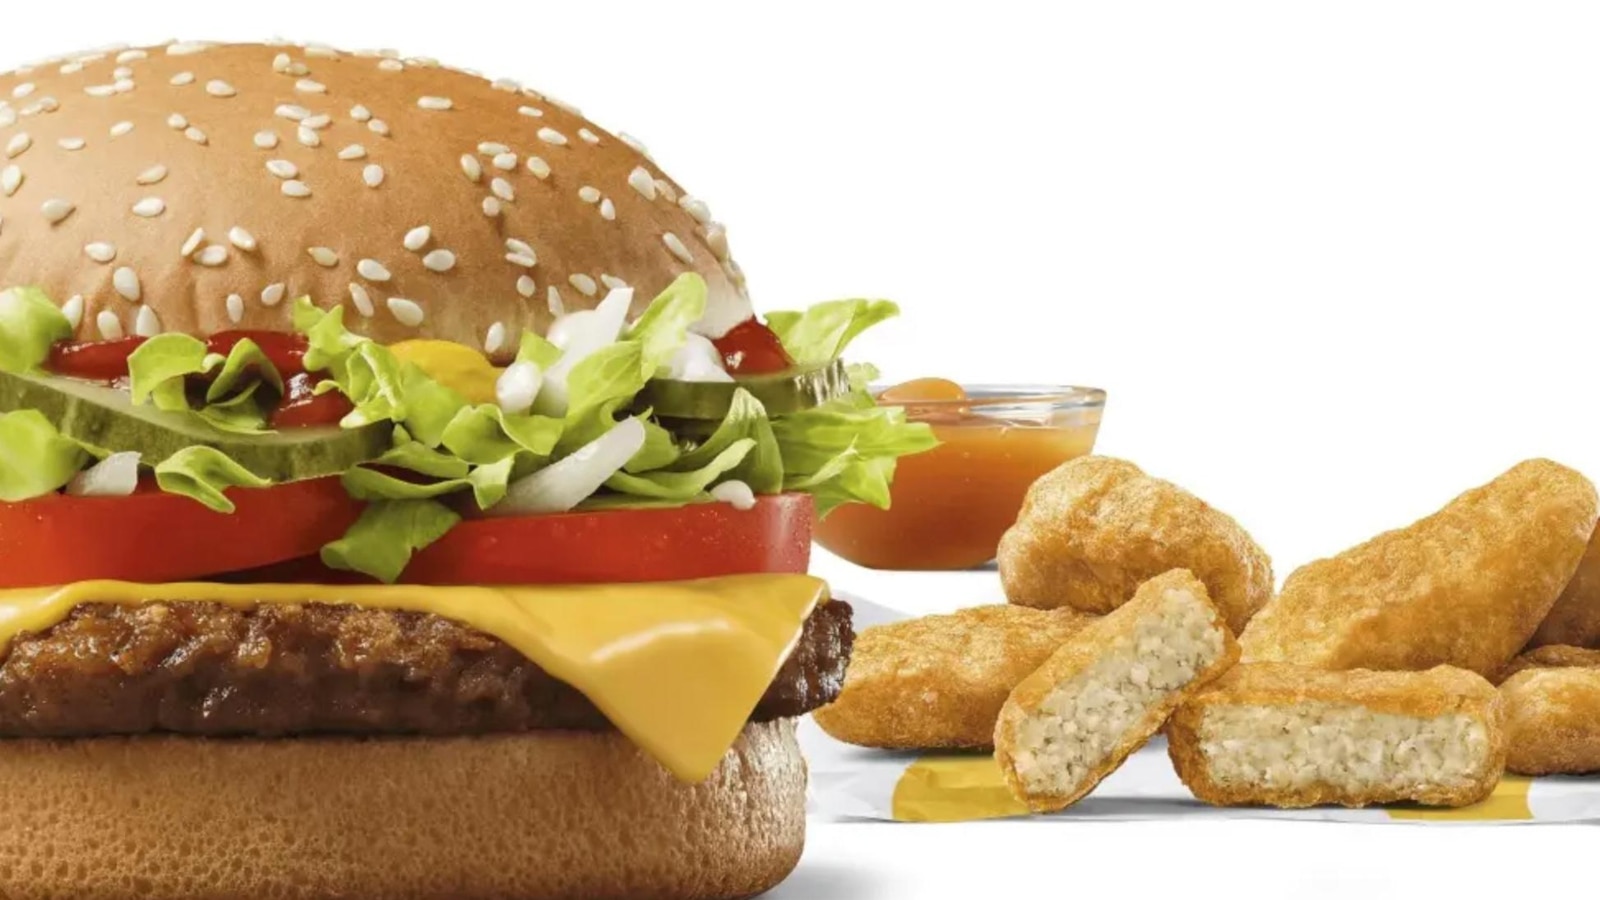 Are US Fast-Food Customers Interested in Plant-Based Meat Options?